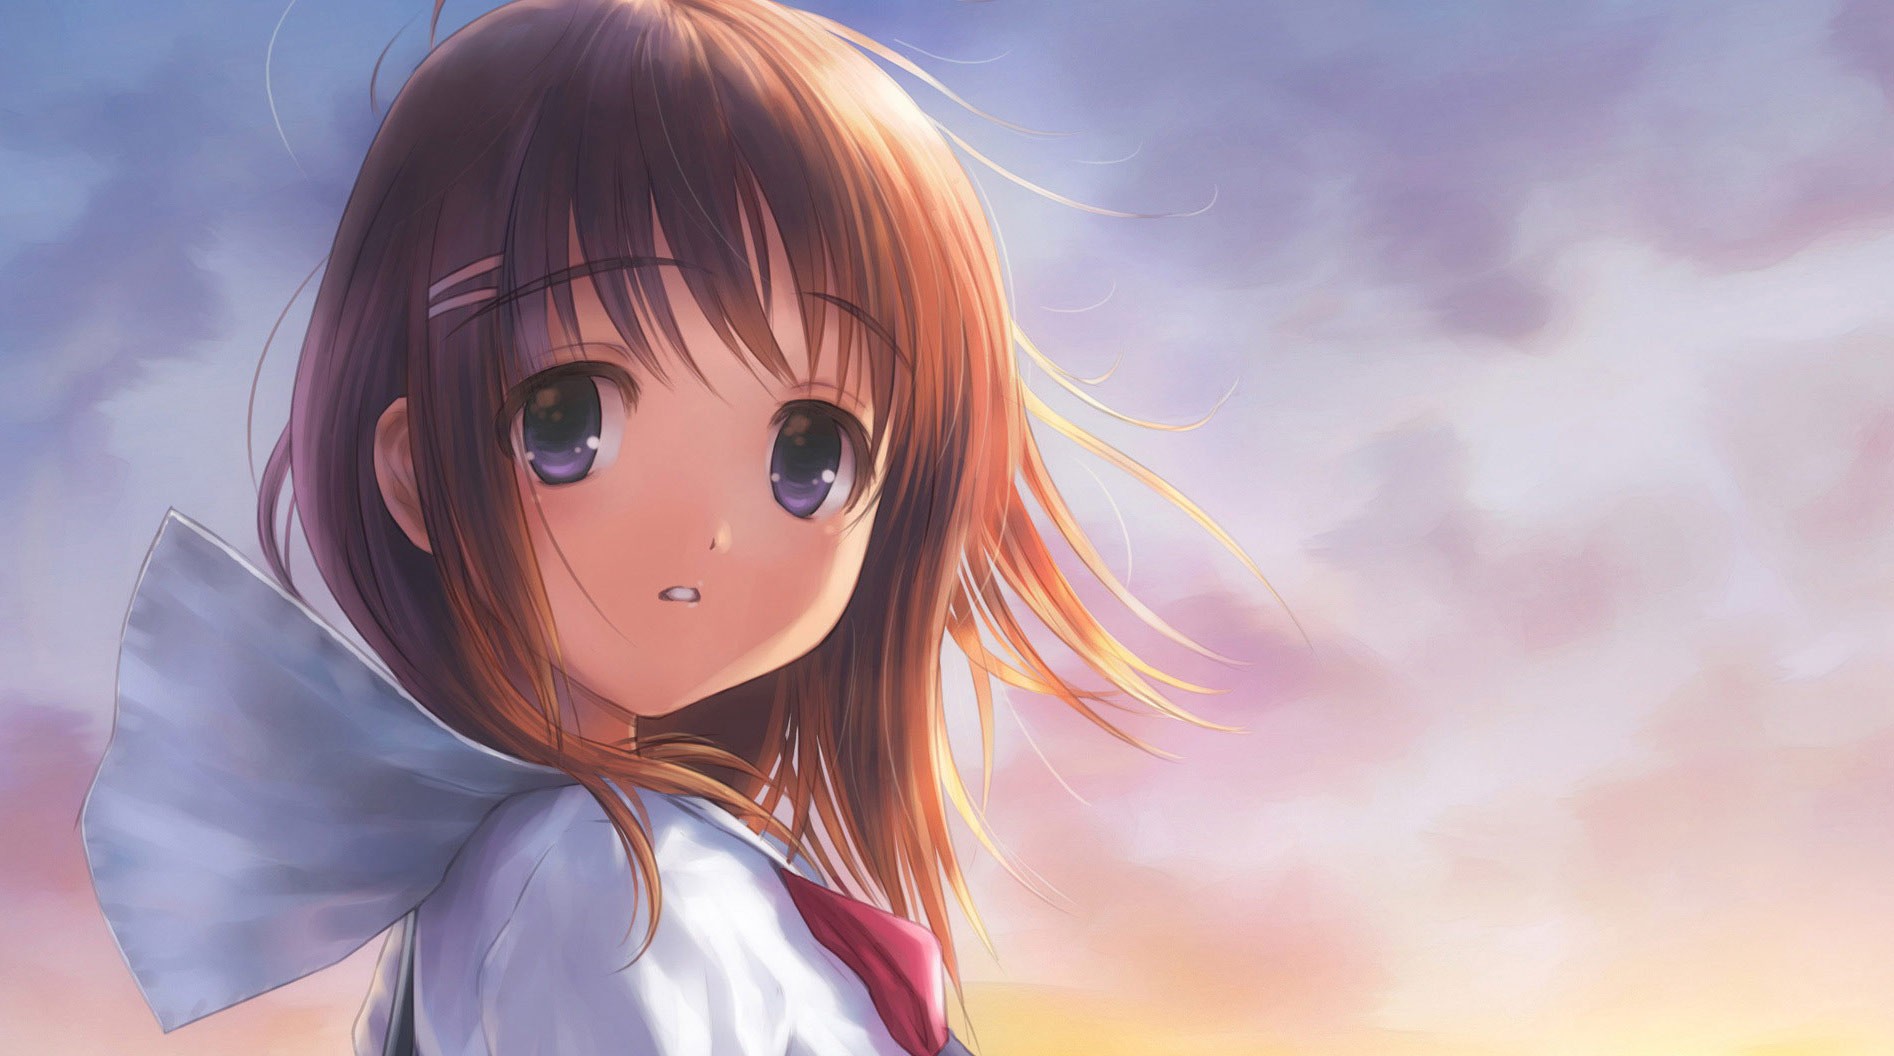  28 2015 By Stephen Comments Off on Cute Anime Girl HD Wallpapers 1894x1056